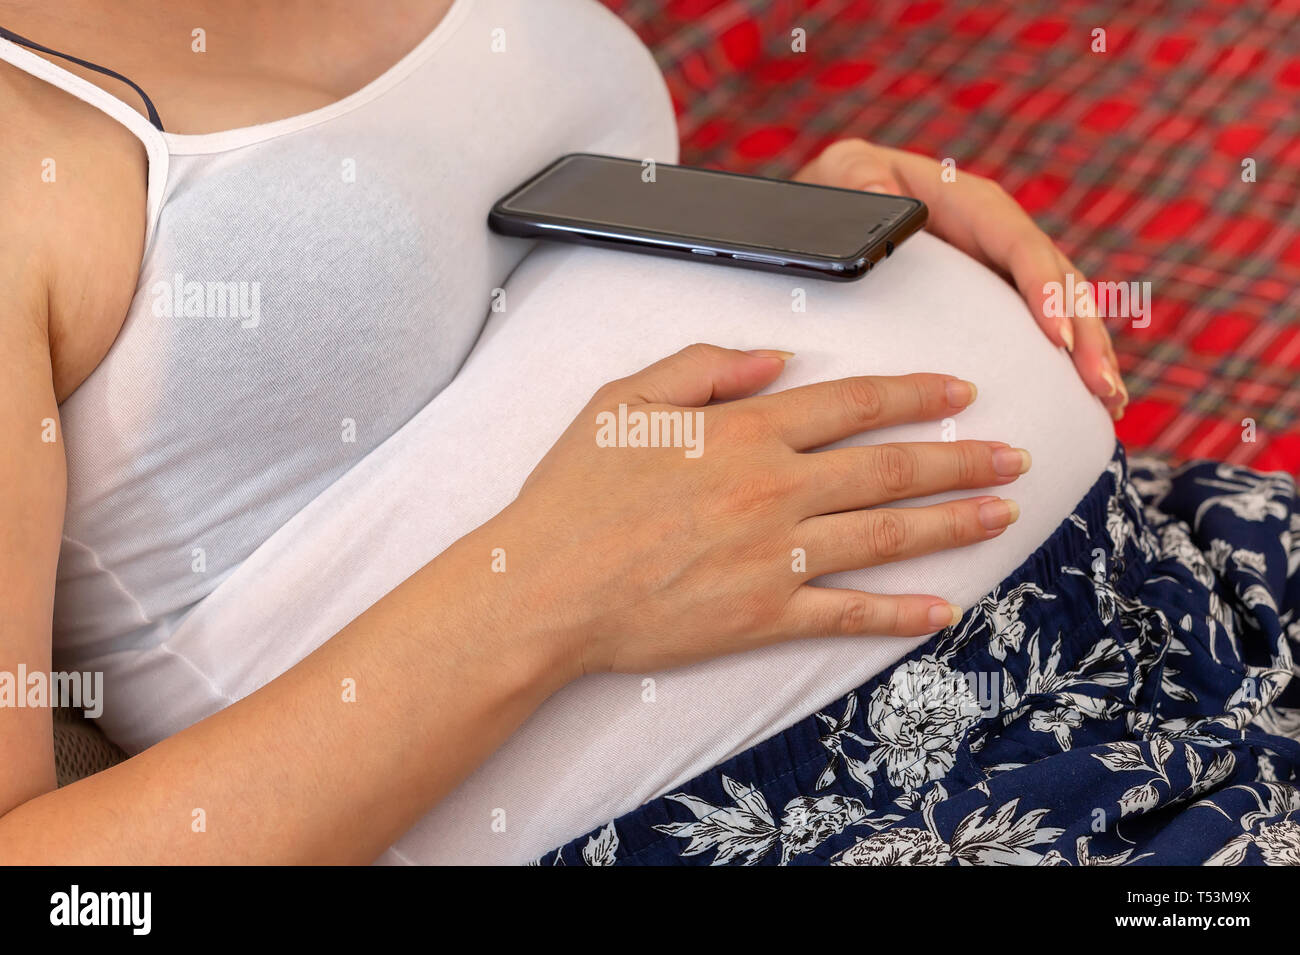 Pregnant woman using cell phone on her belly. Waiting for that important call. Stock Photo